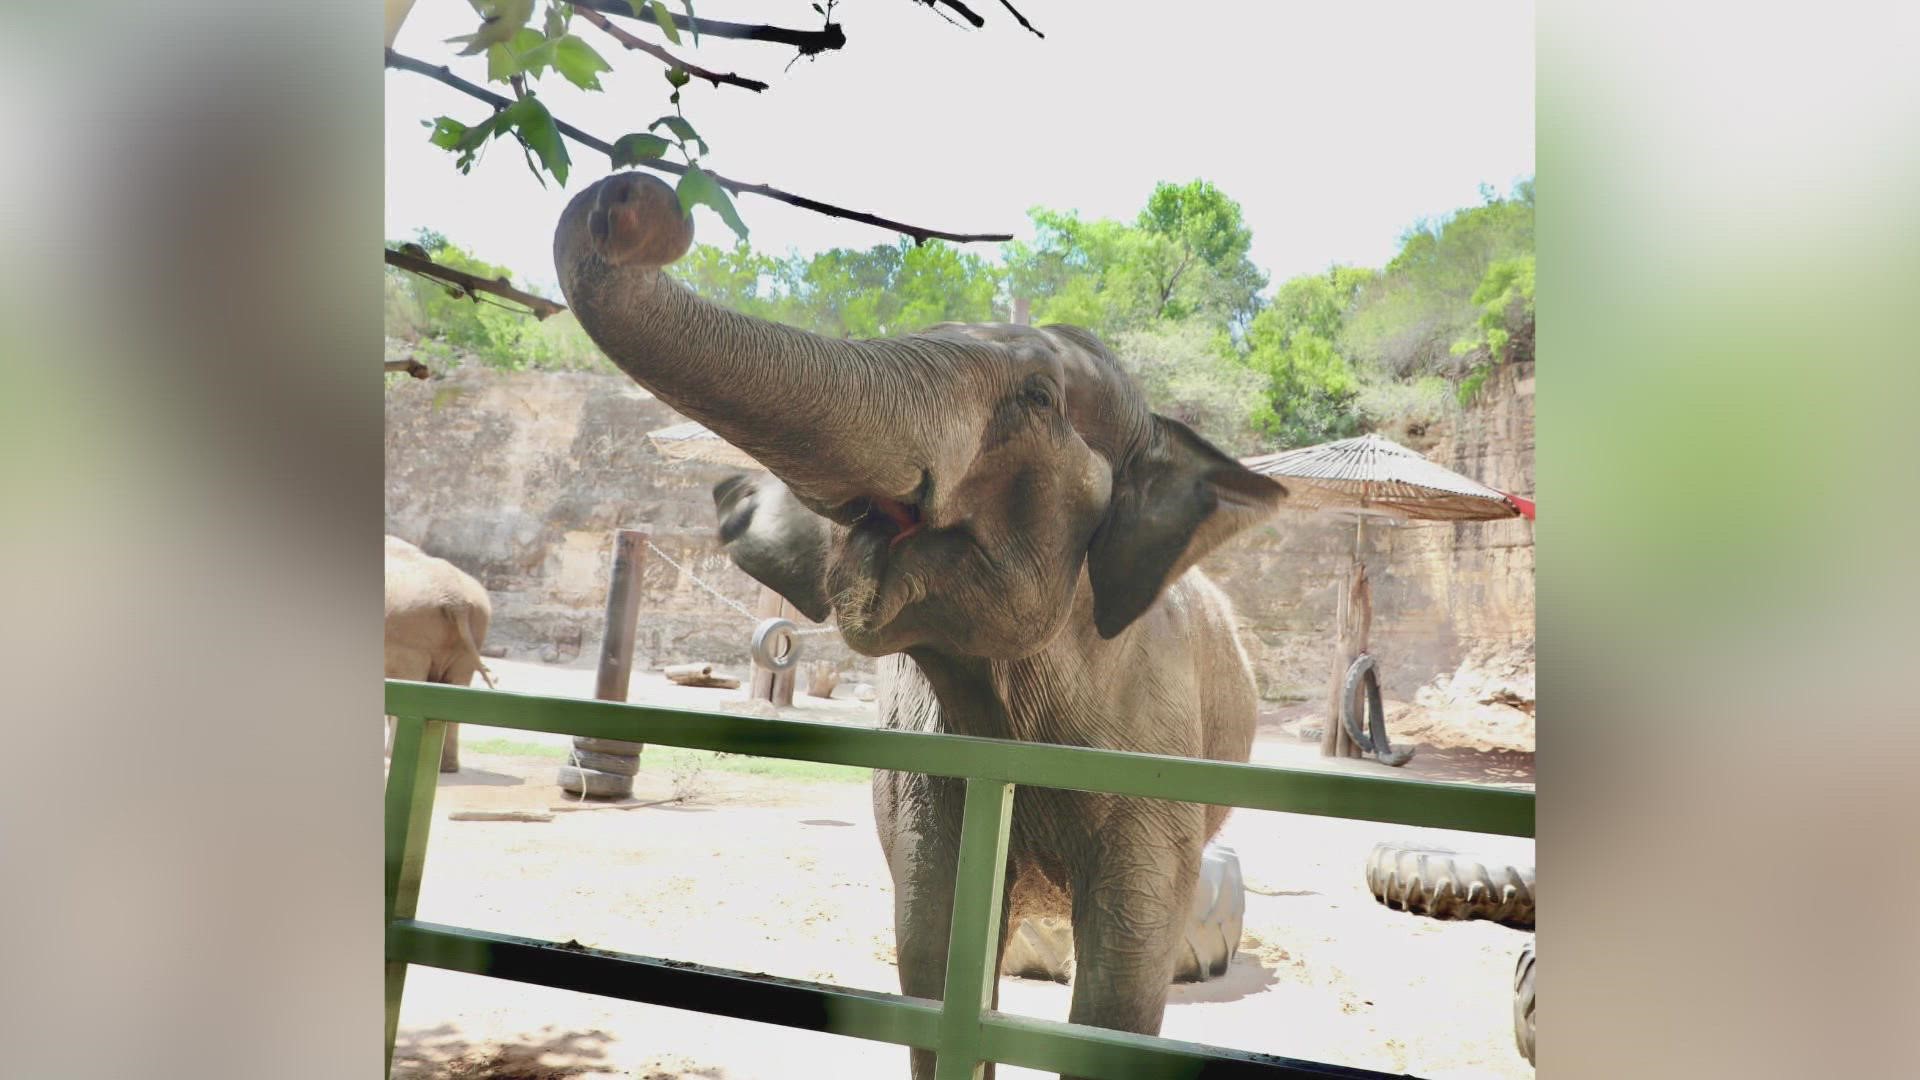 Lucky had to be euthanized. She was one of the oldest elephants in the country.